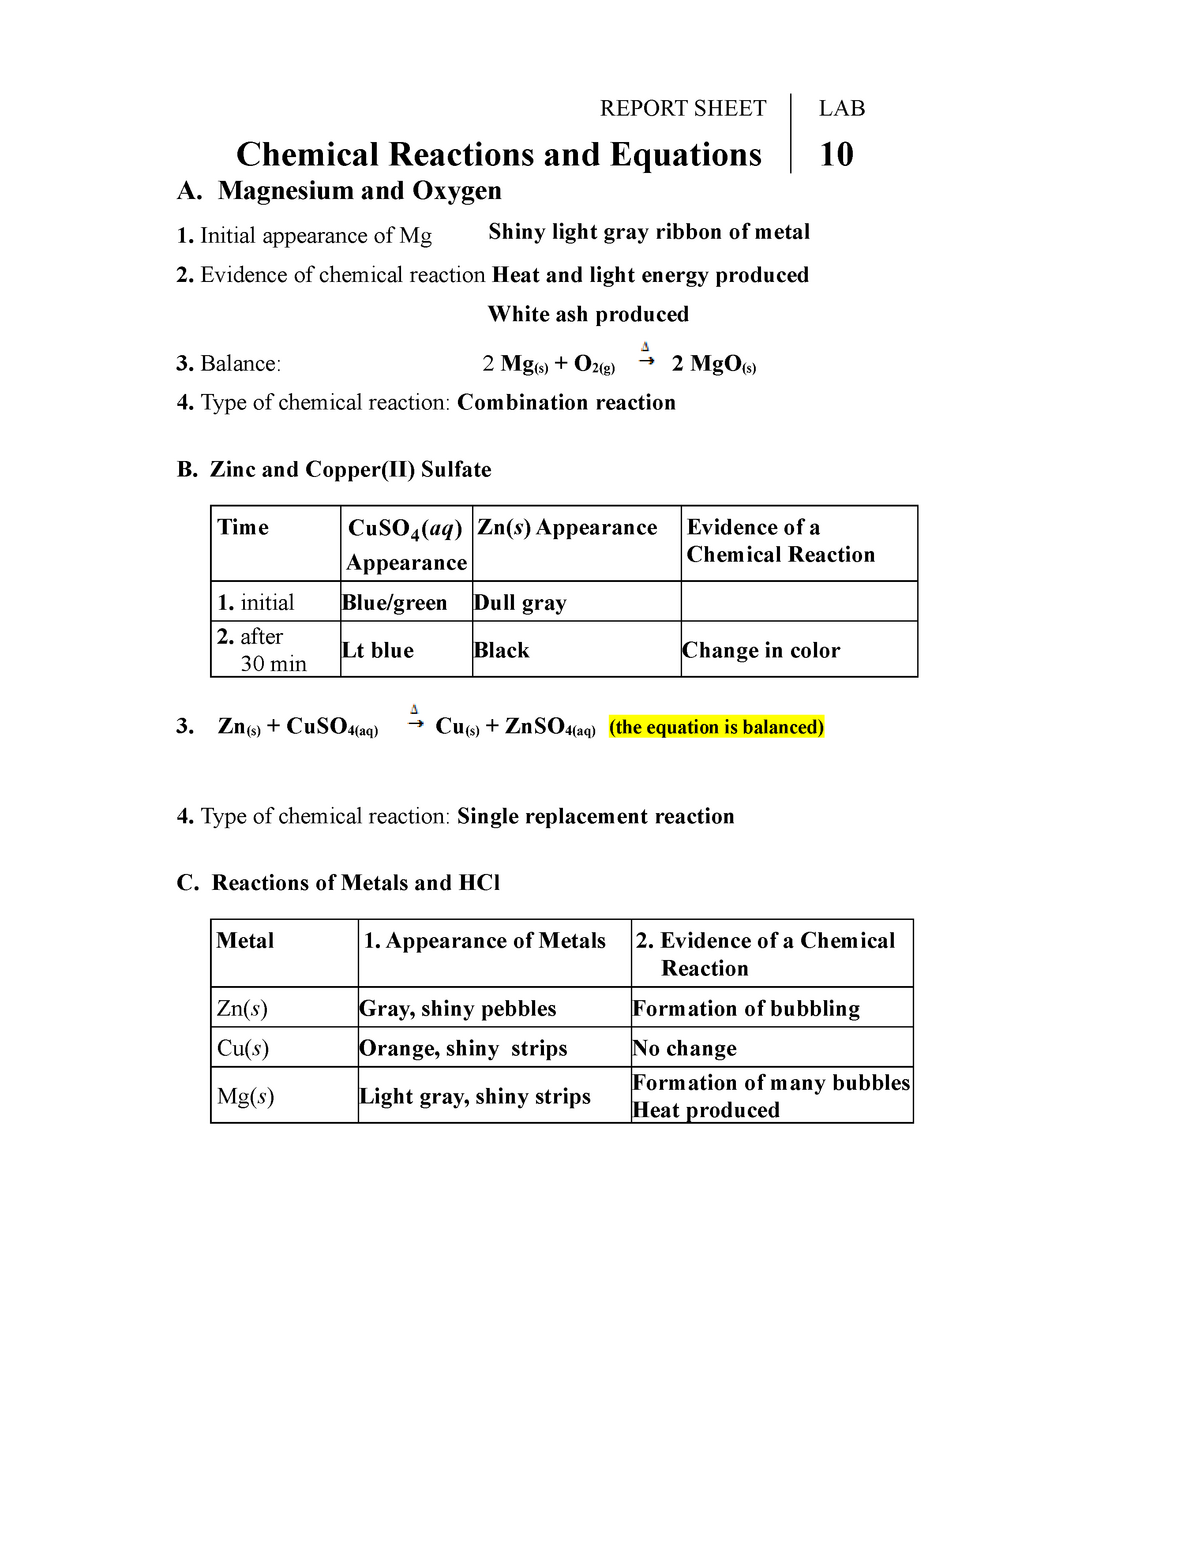 research questions on chemical reactions